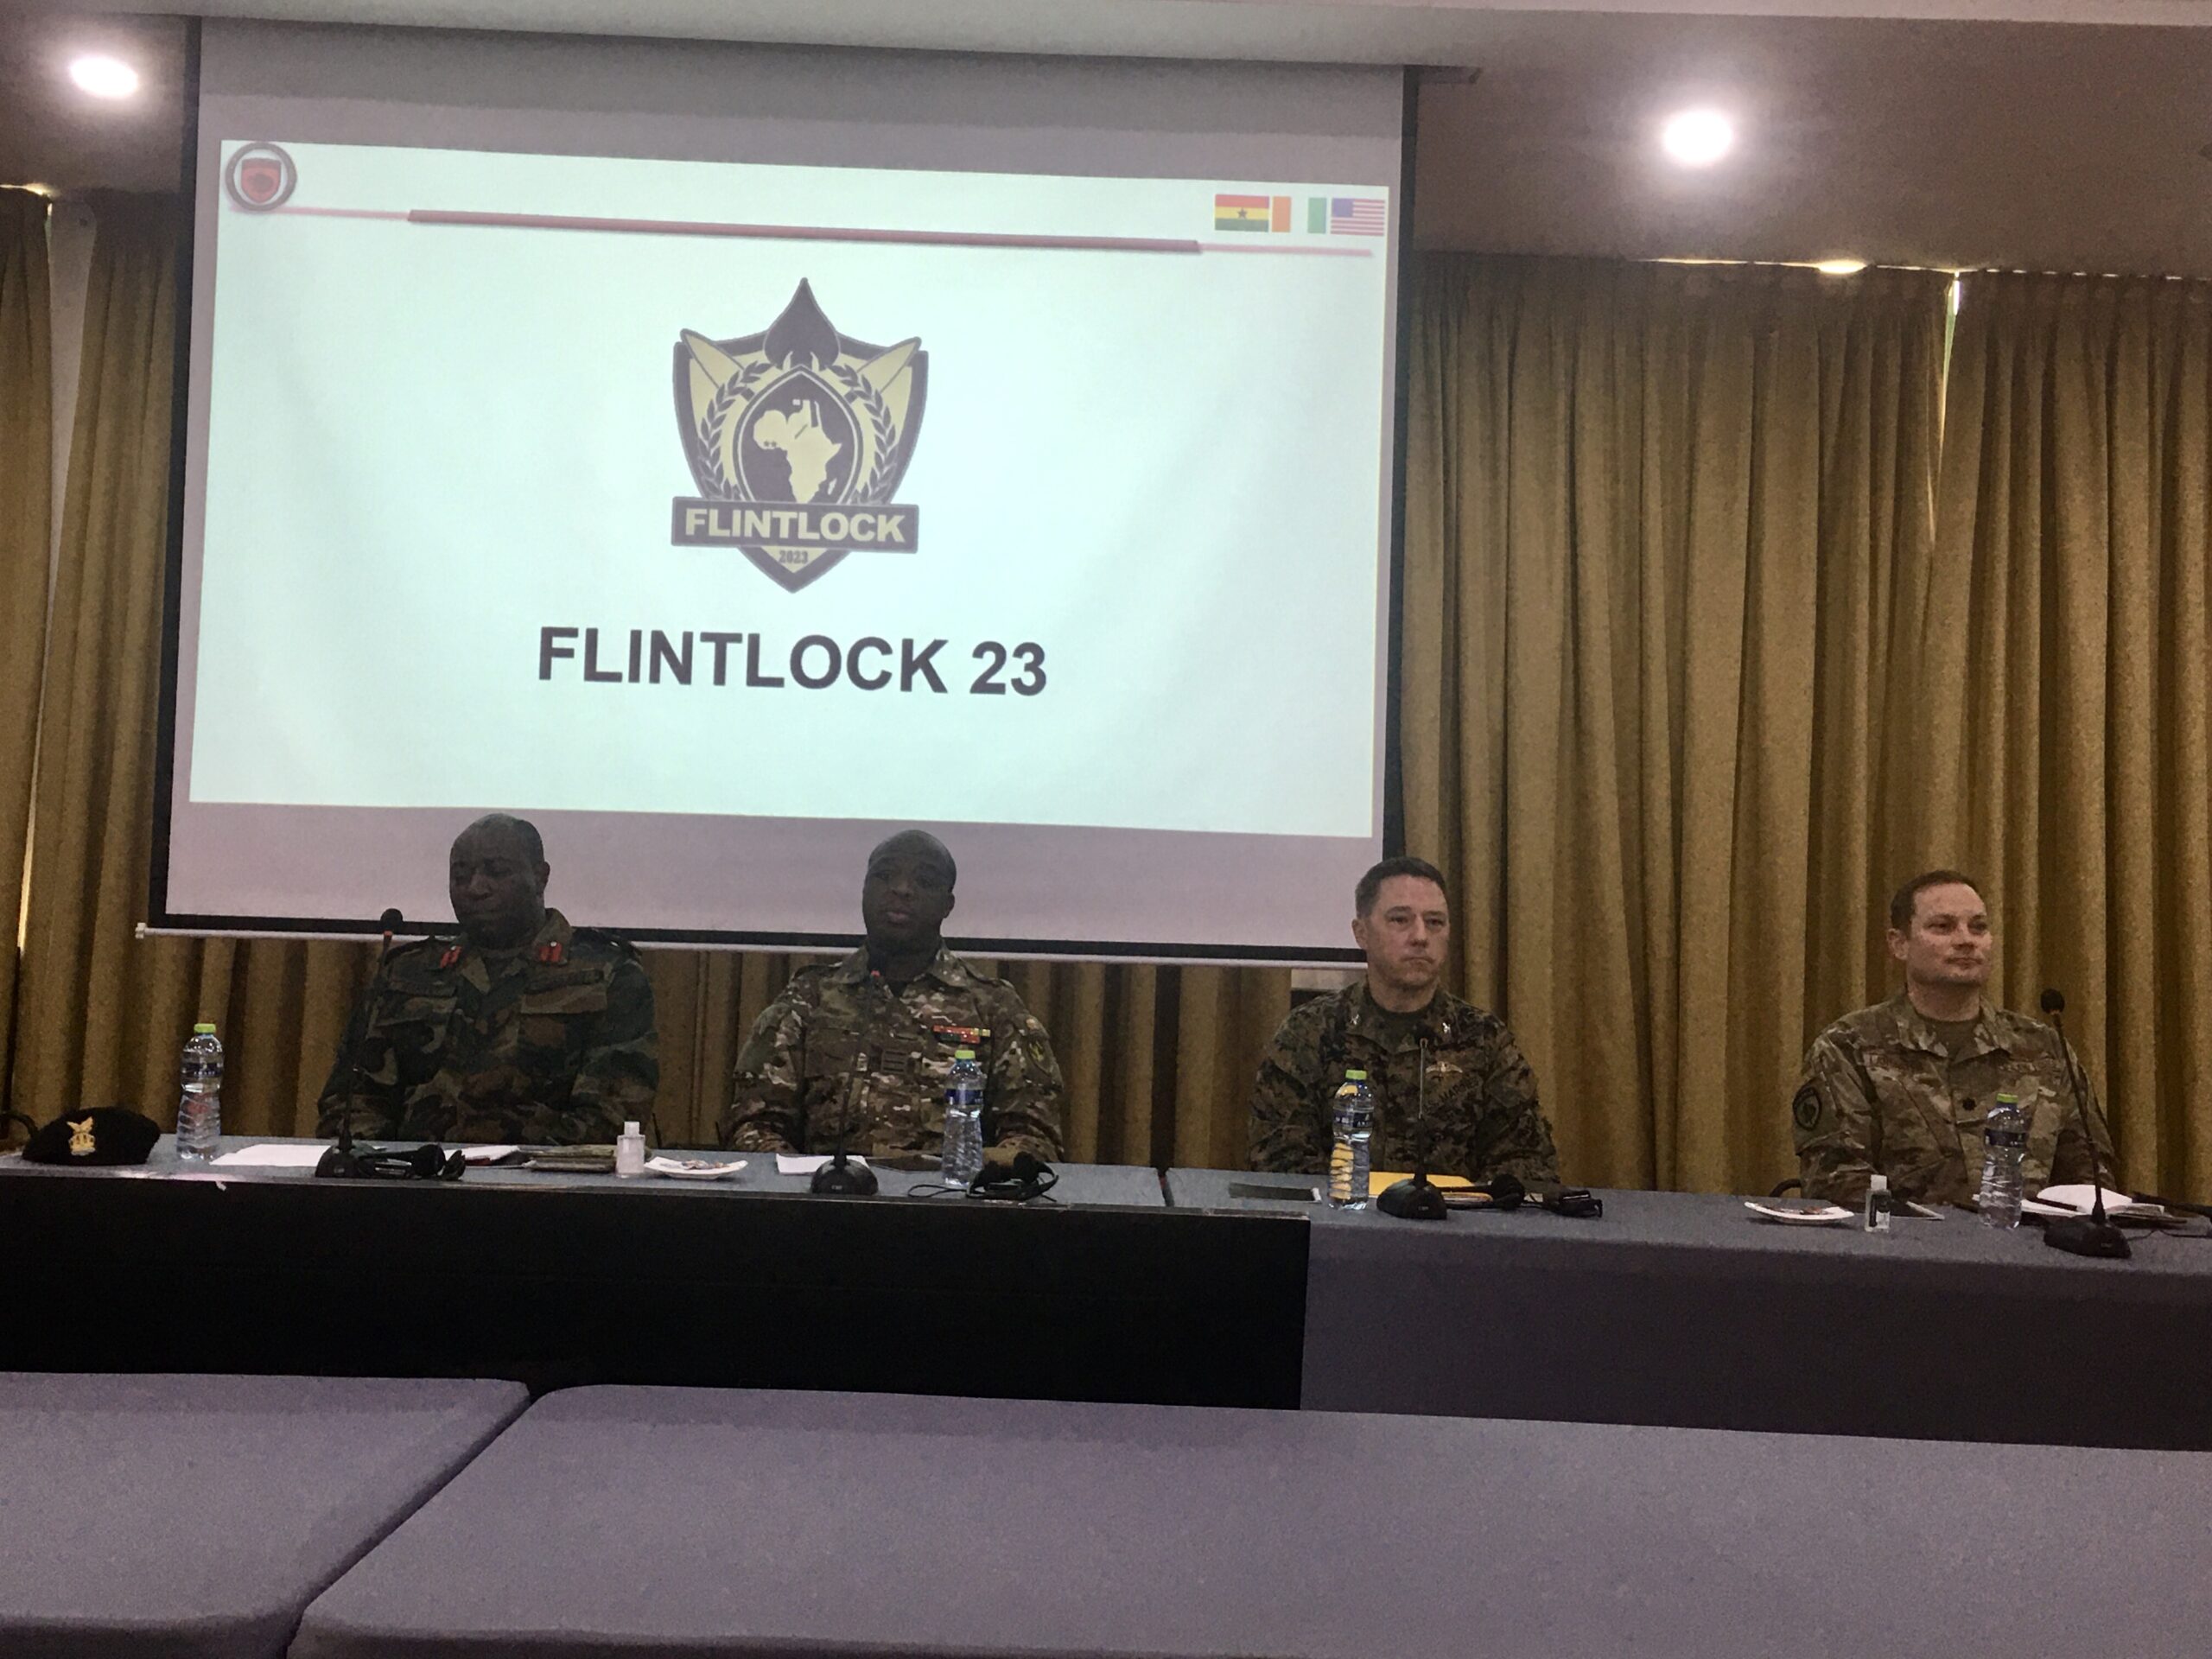 Ghana to host Exercise Flintlock for the first time in 15 years